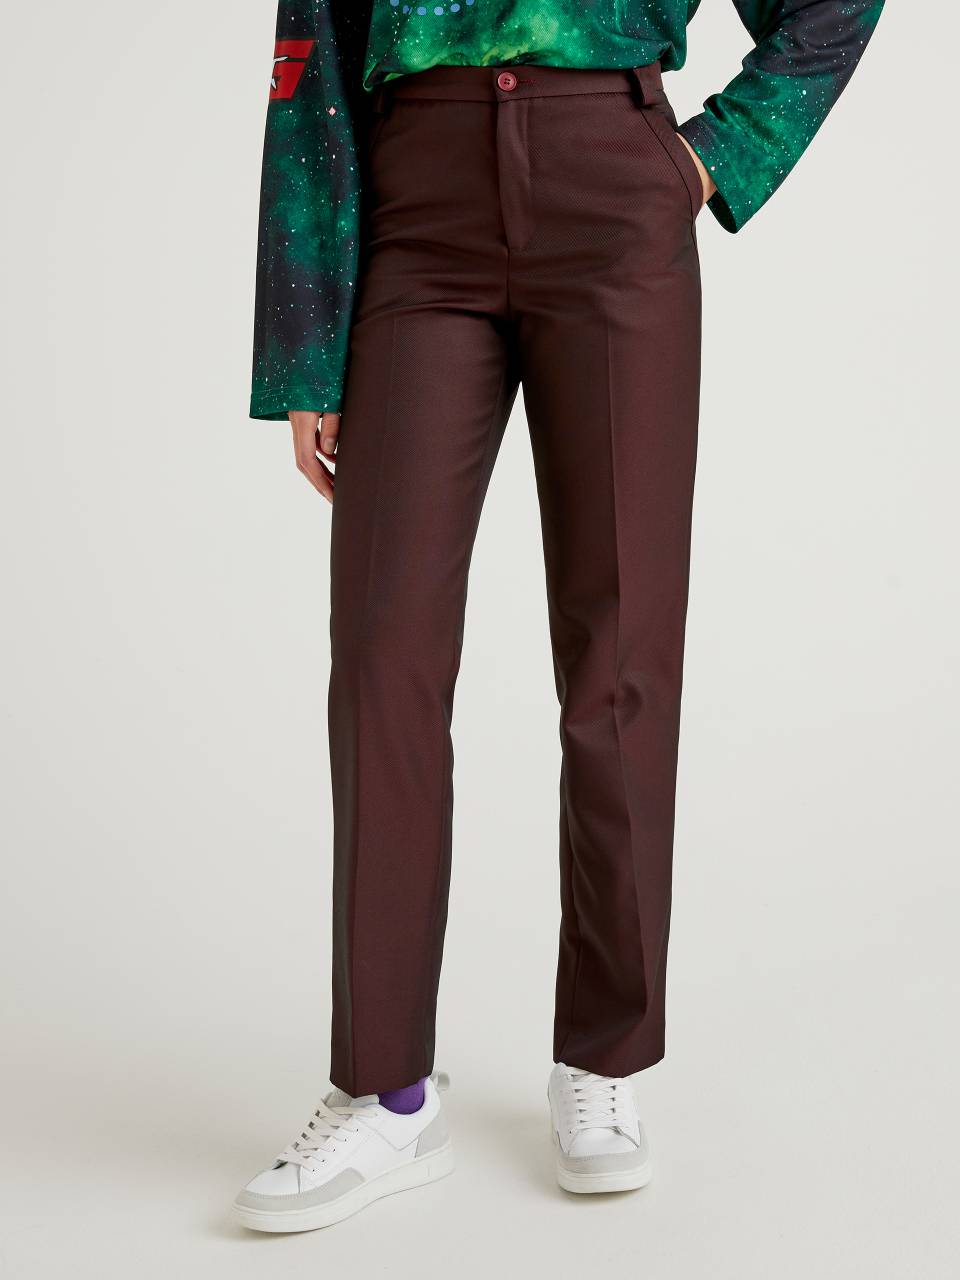 Benetton Solid color trousers by Ghali. 1